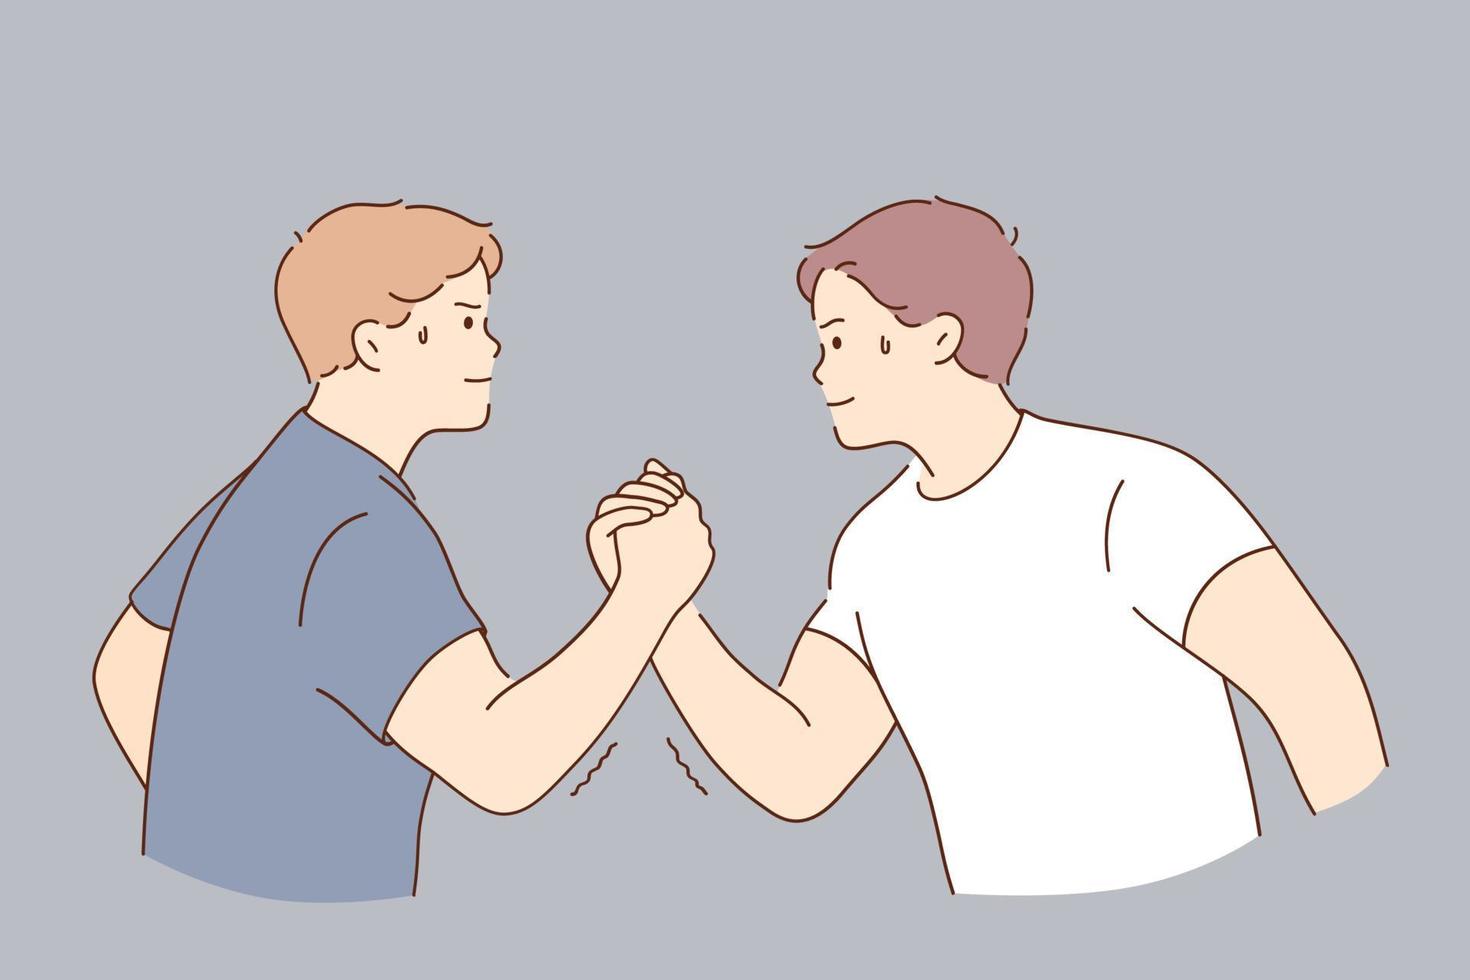 Arms wrestling, competition of strength concept. Young serious men cartoon character holding hands competing in strength trying to win vector illustration